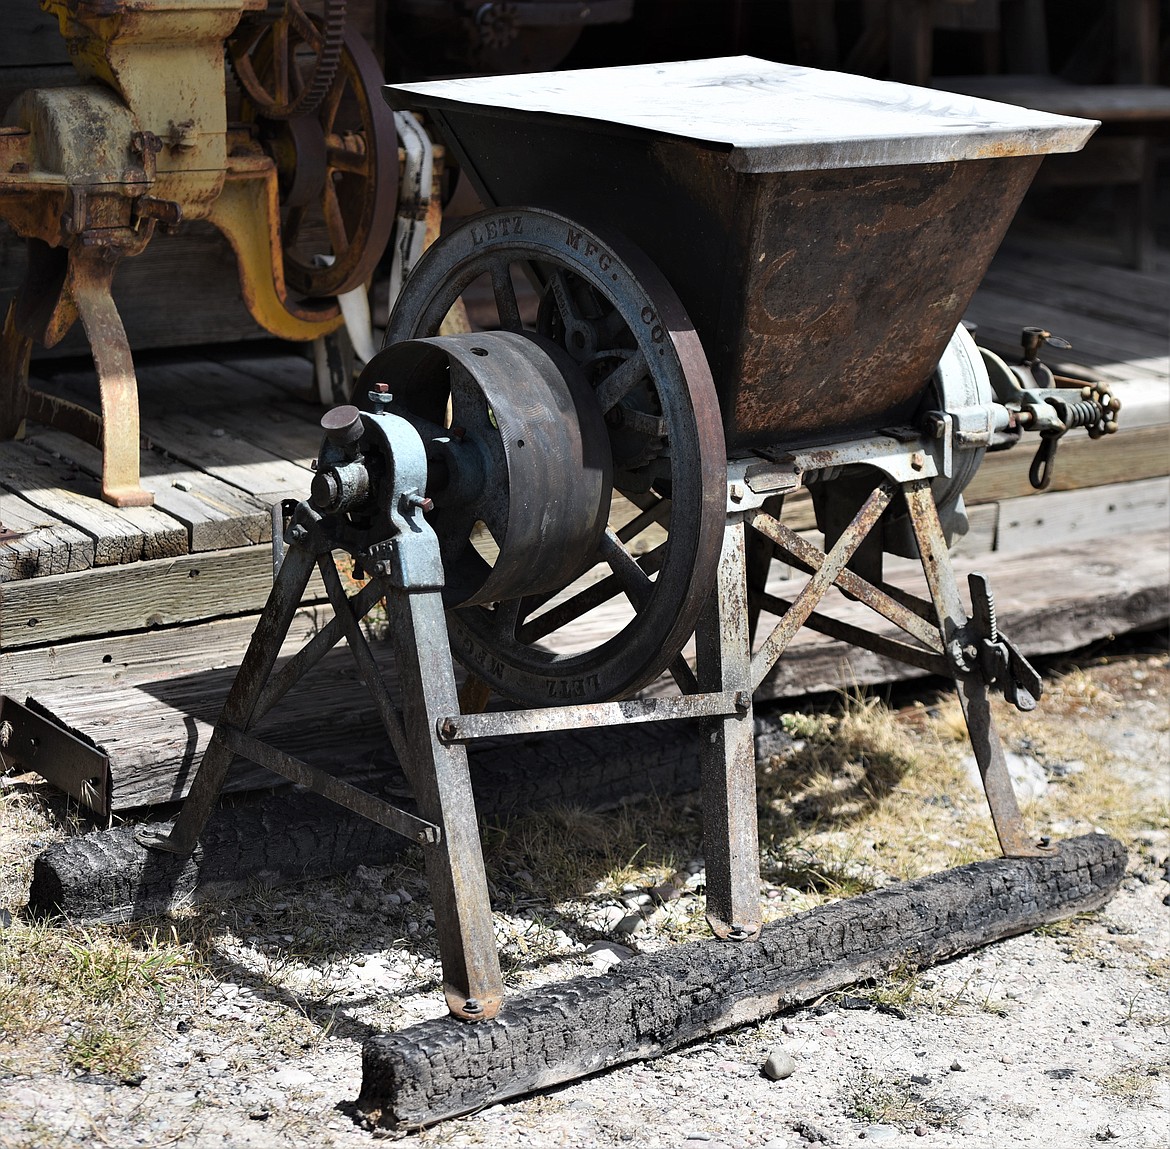 Some pieces of equipment burned in the fire could be restored with a bit of cleaning and replacement of wooden parts. (Scot Heisel/Lake County Leader)